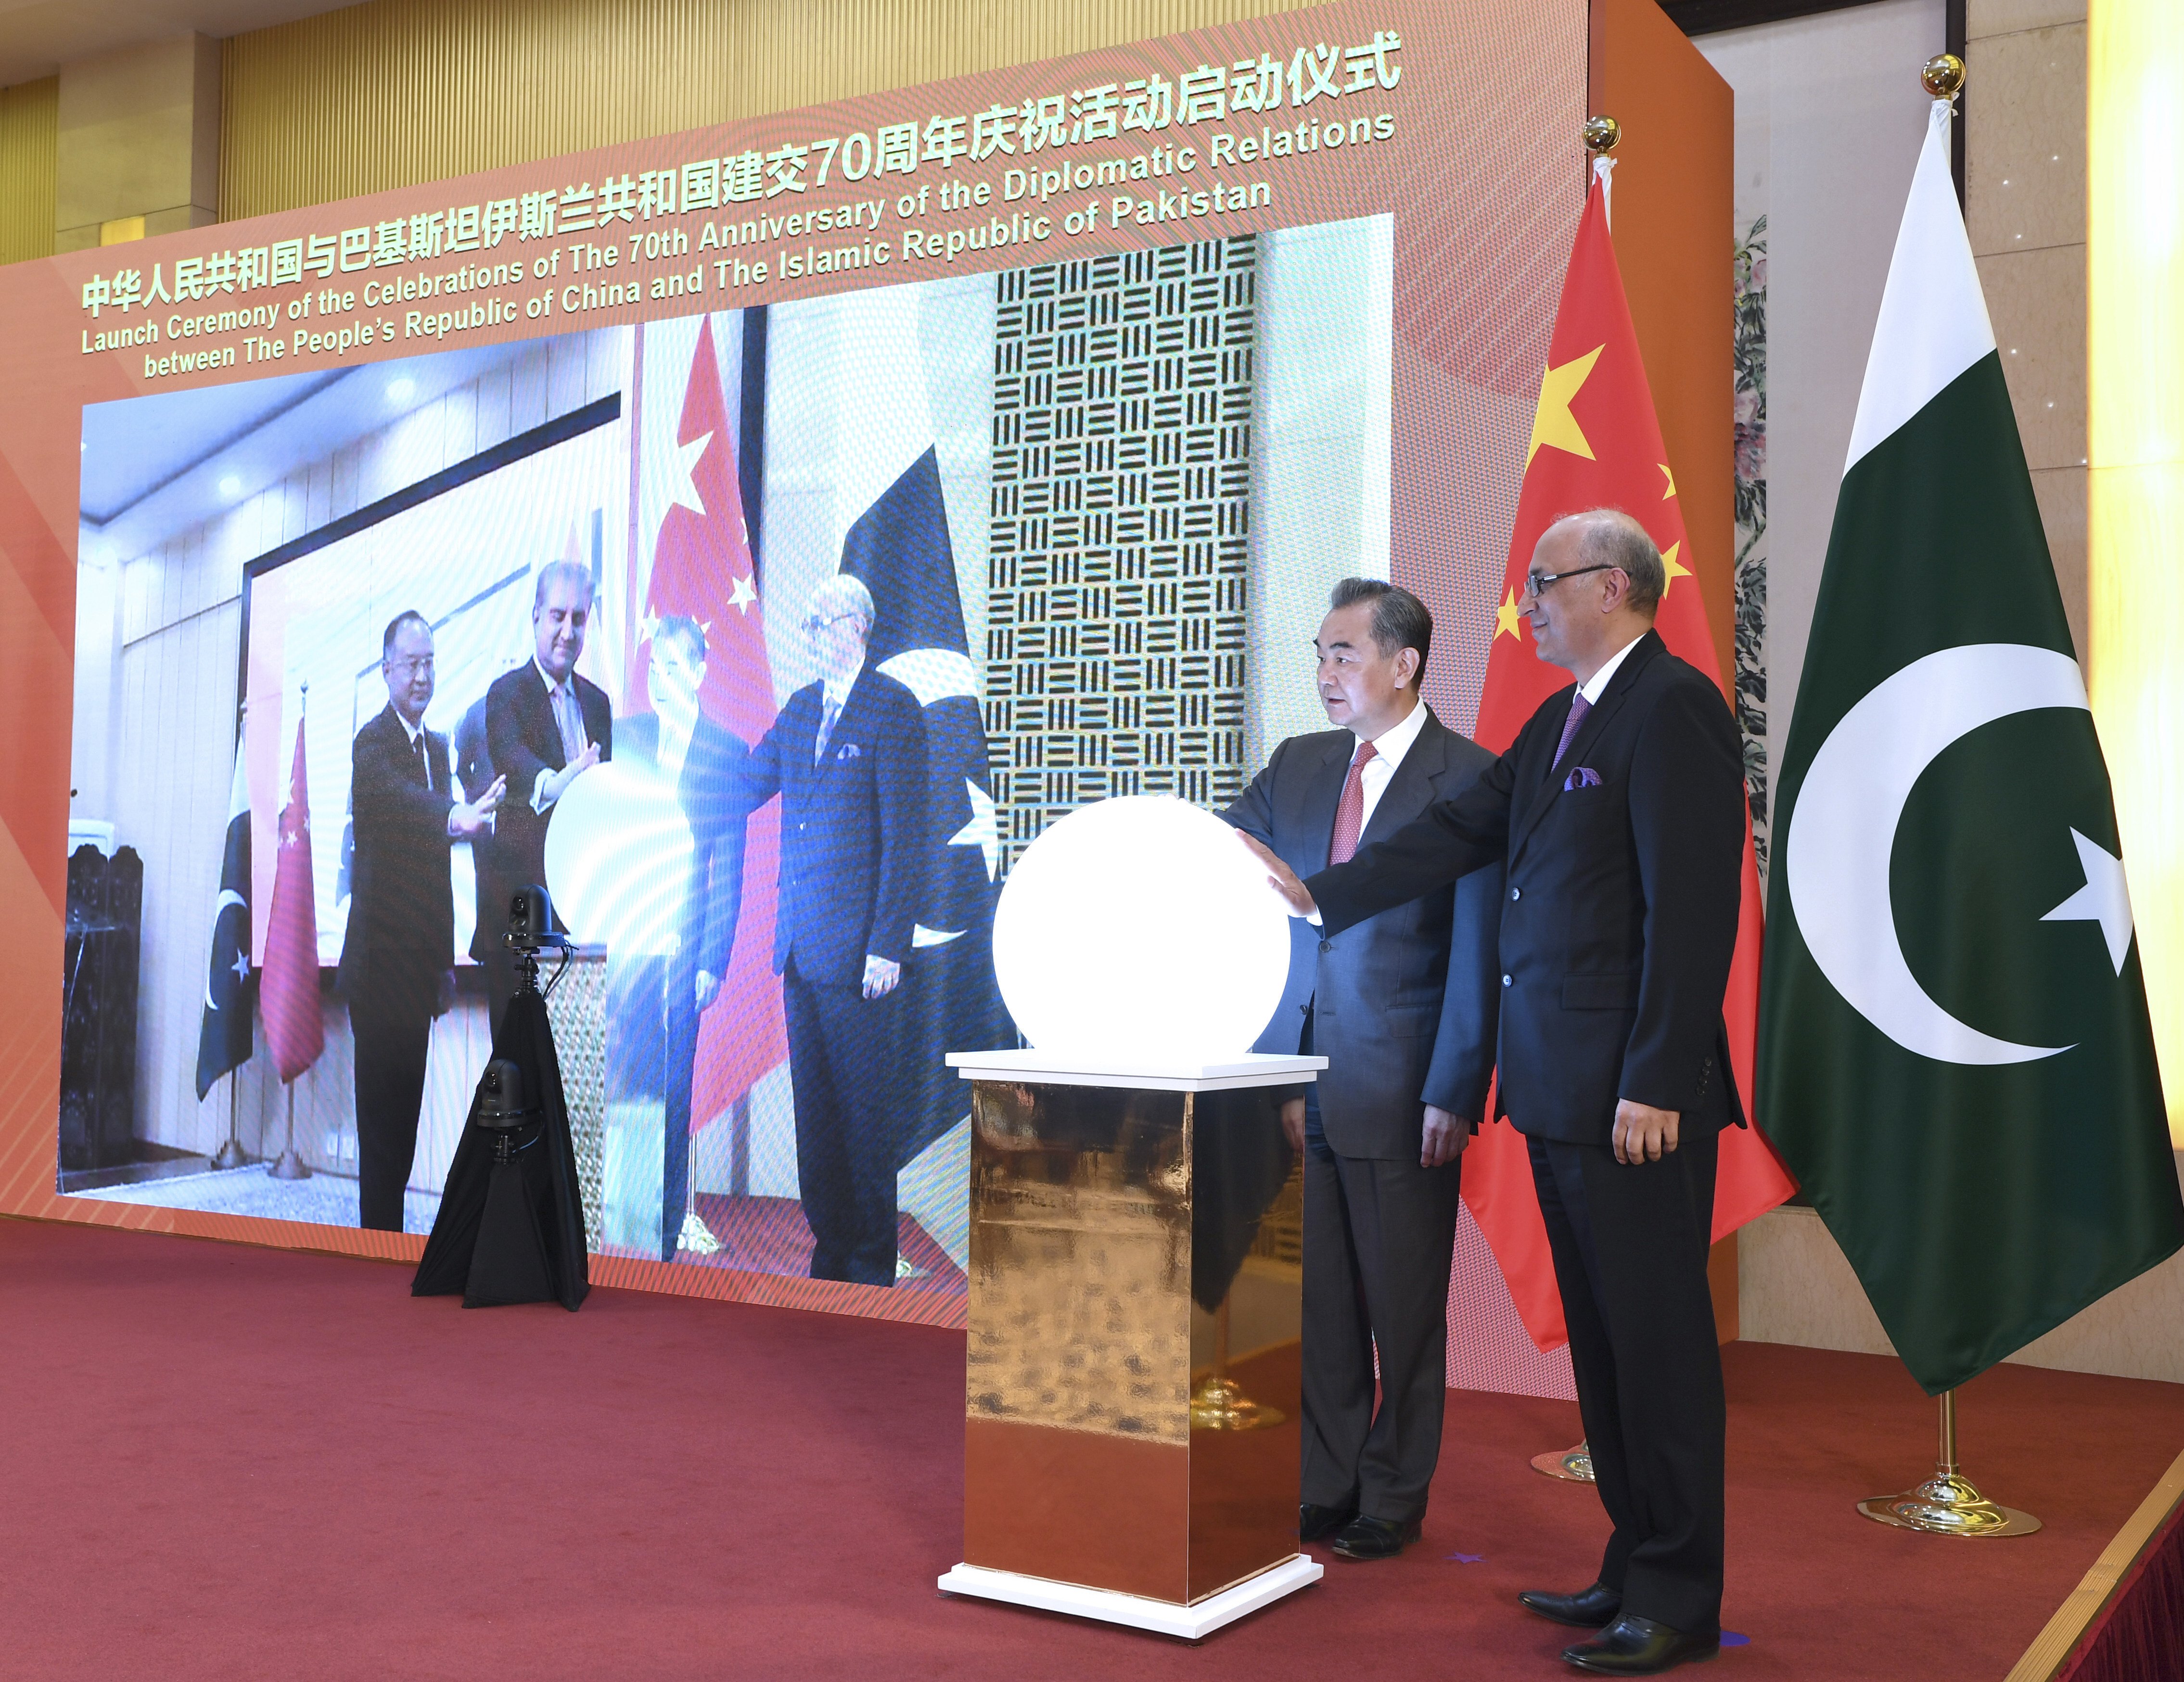 Foreign Minister Wang Yi (second right) attends a virtual ceremony with Pakistani Foreign Minister Shah Mahmood Qureshi to formally commence the celebrations of the 70th anniversary of diplomatic relations between the two countries in Beijing on March 2. Photo: Xinhua